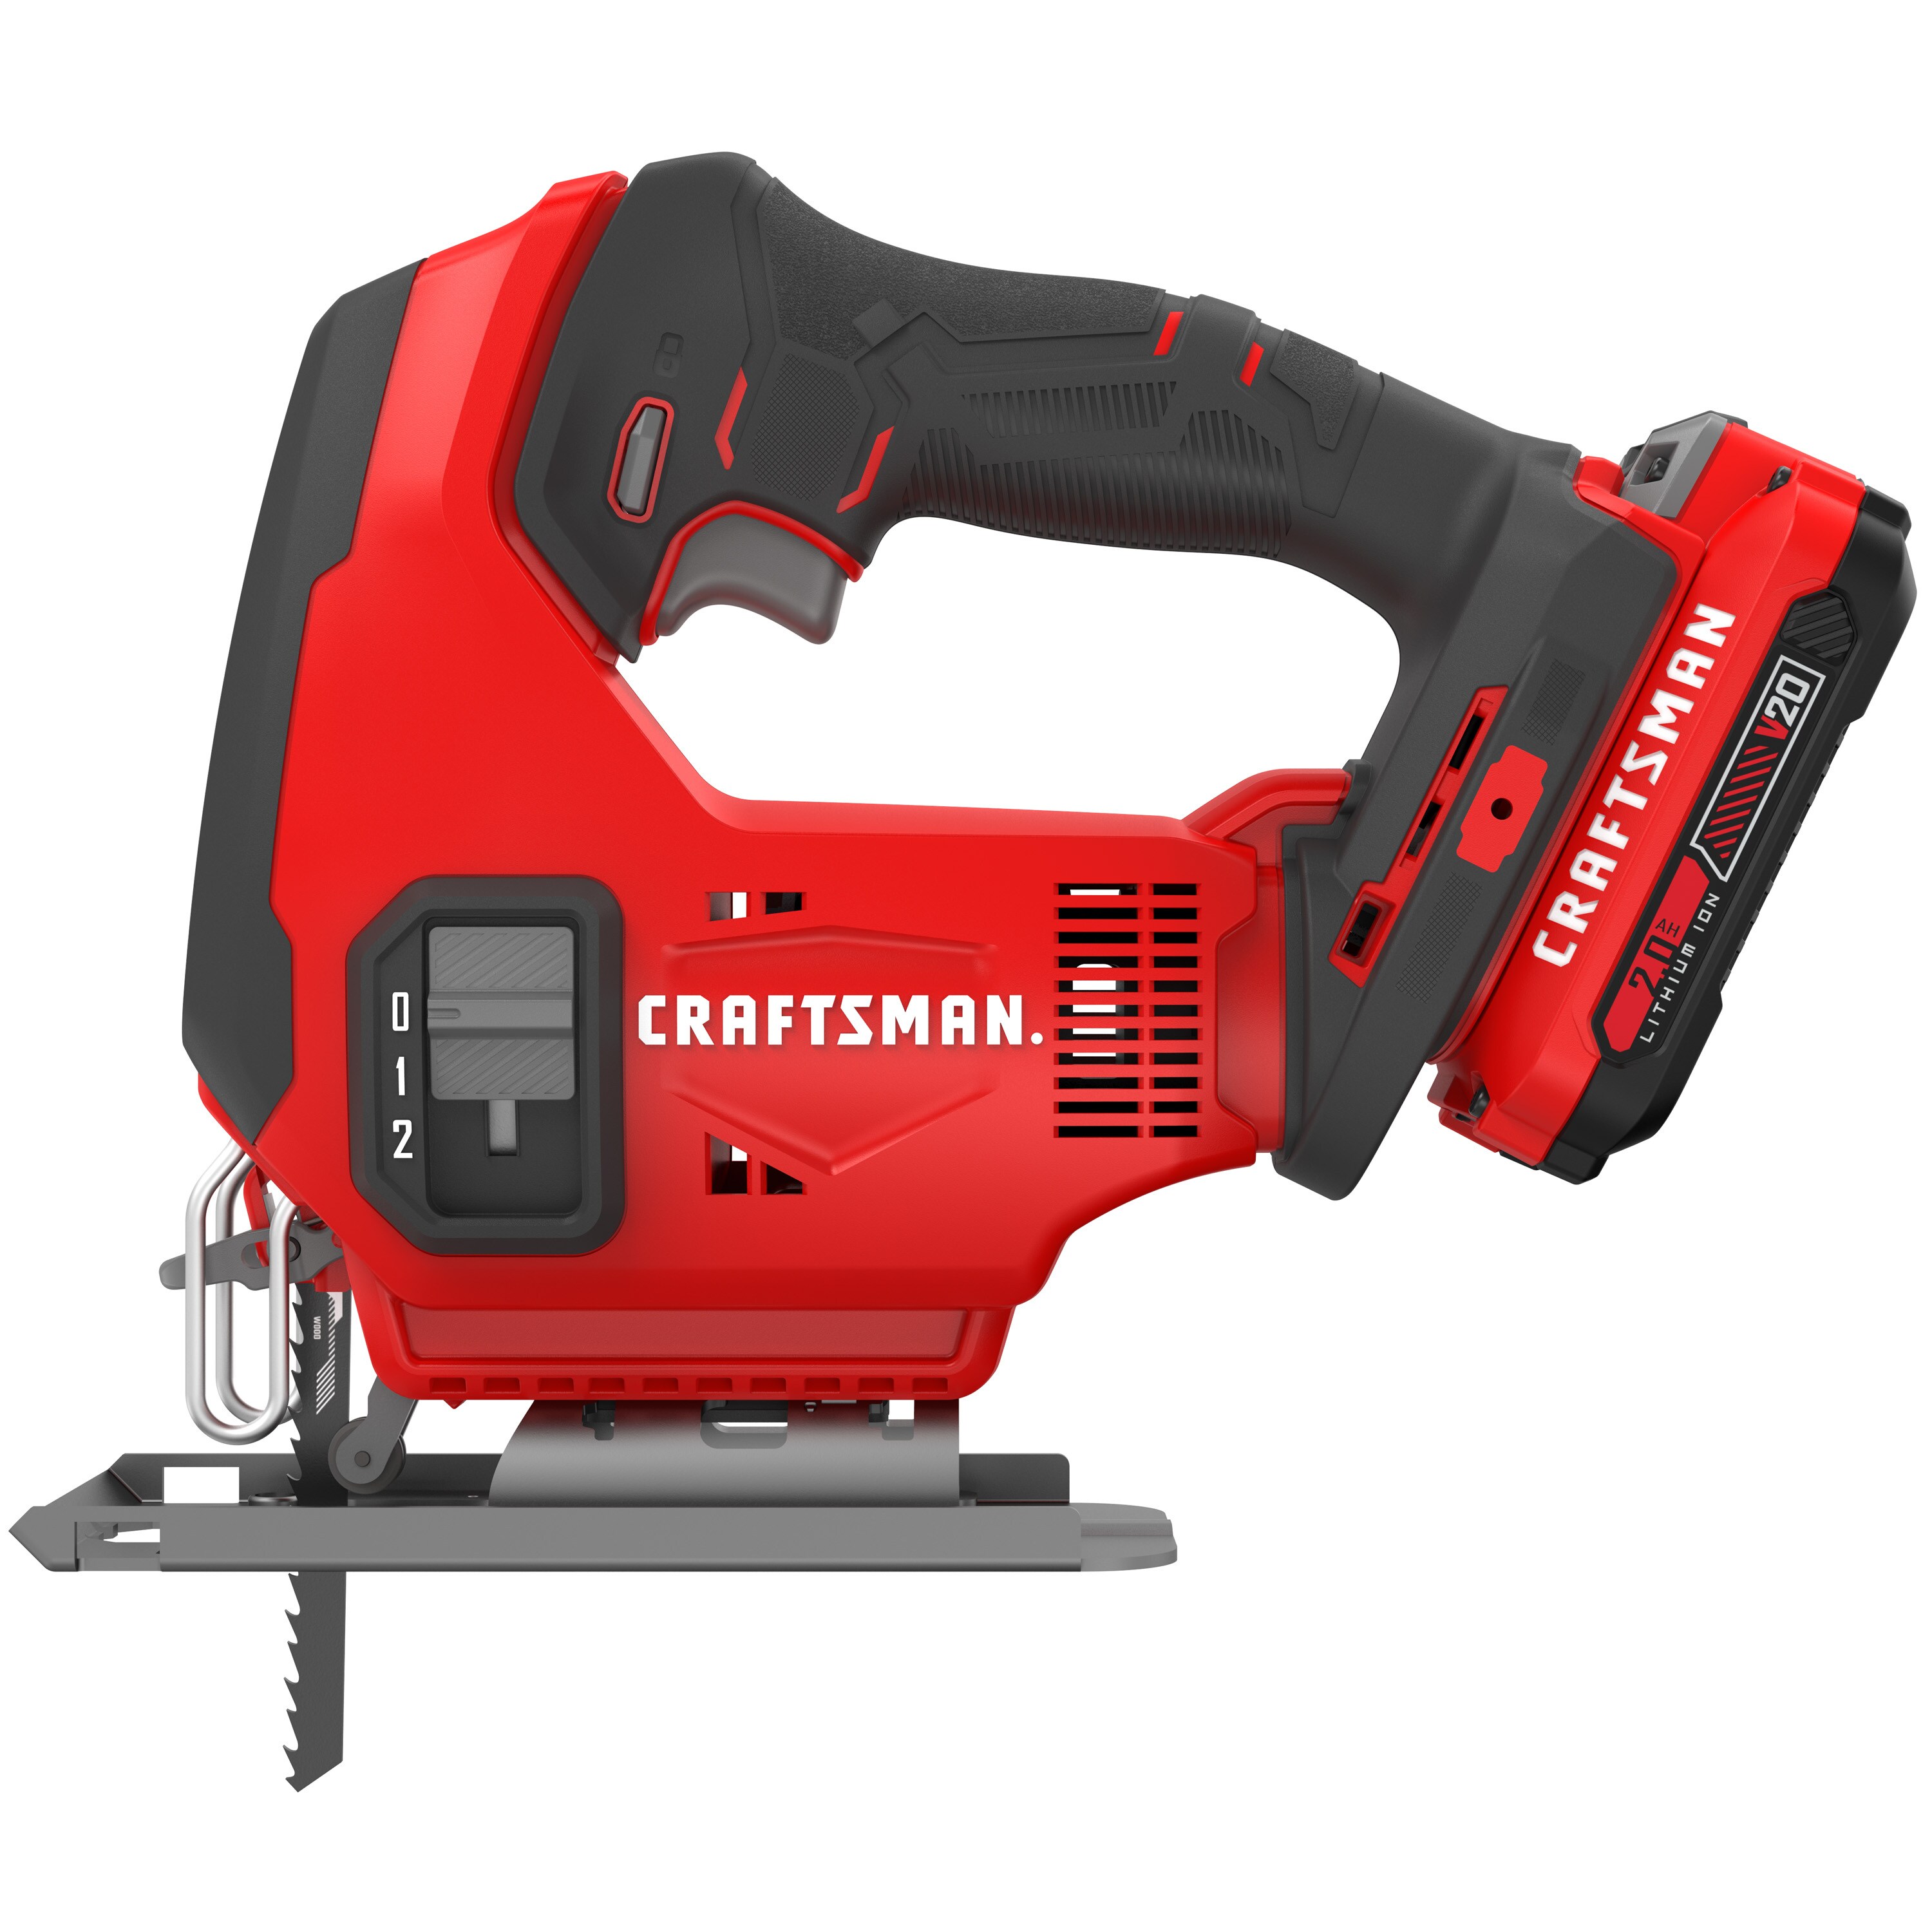 CRAFTSMAN V20 20-volt Max Variable Speed Keyless Cordless Jigsaw (Battery Included)